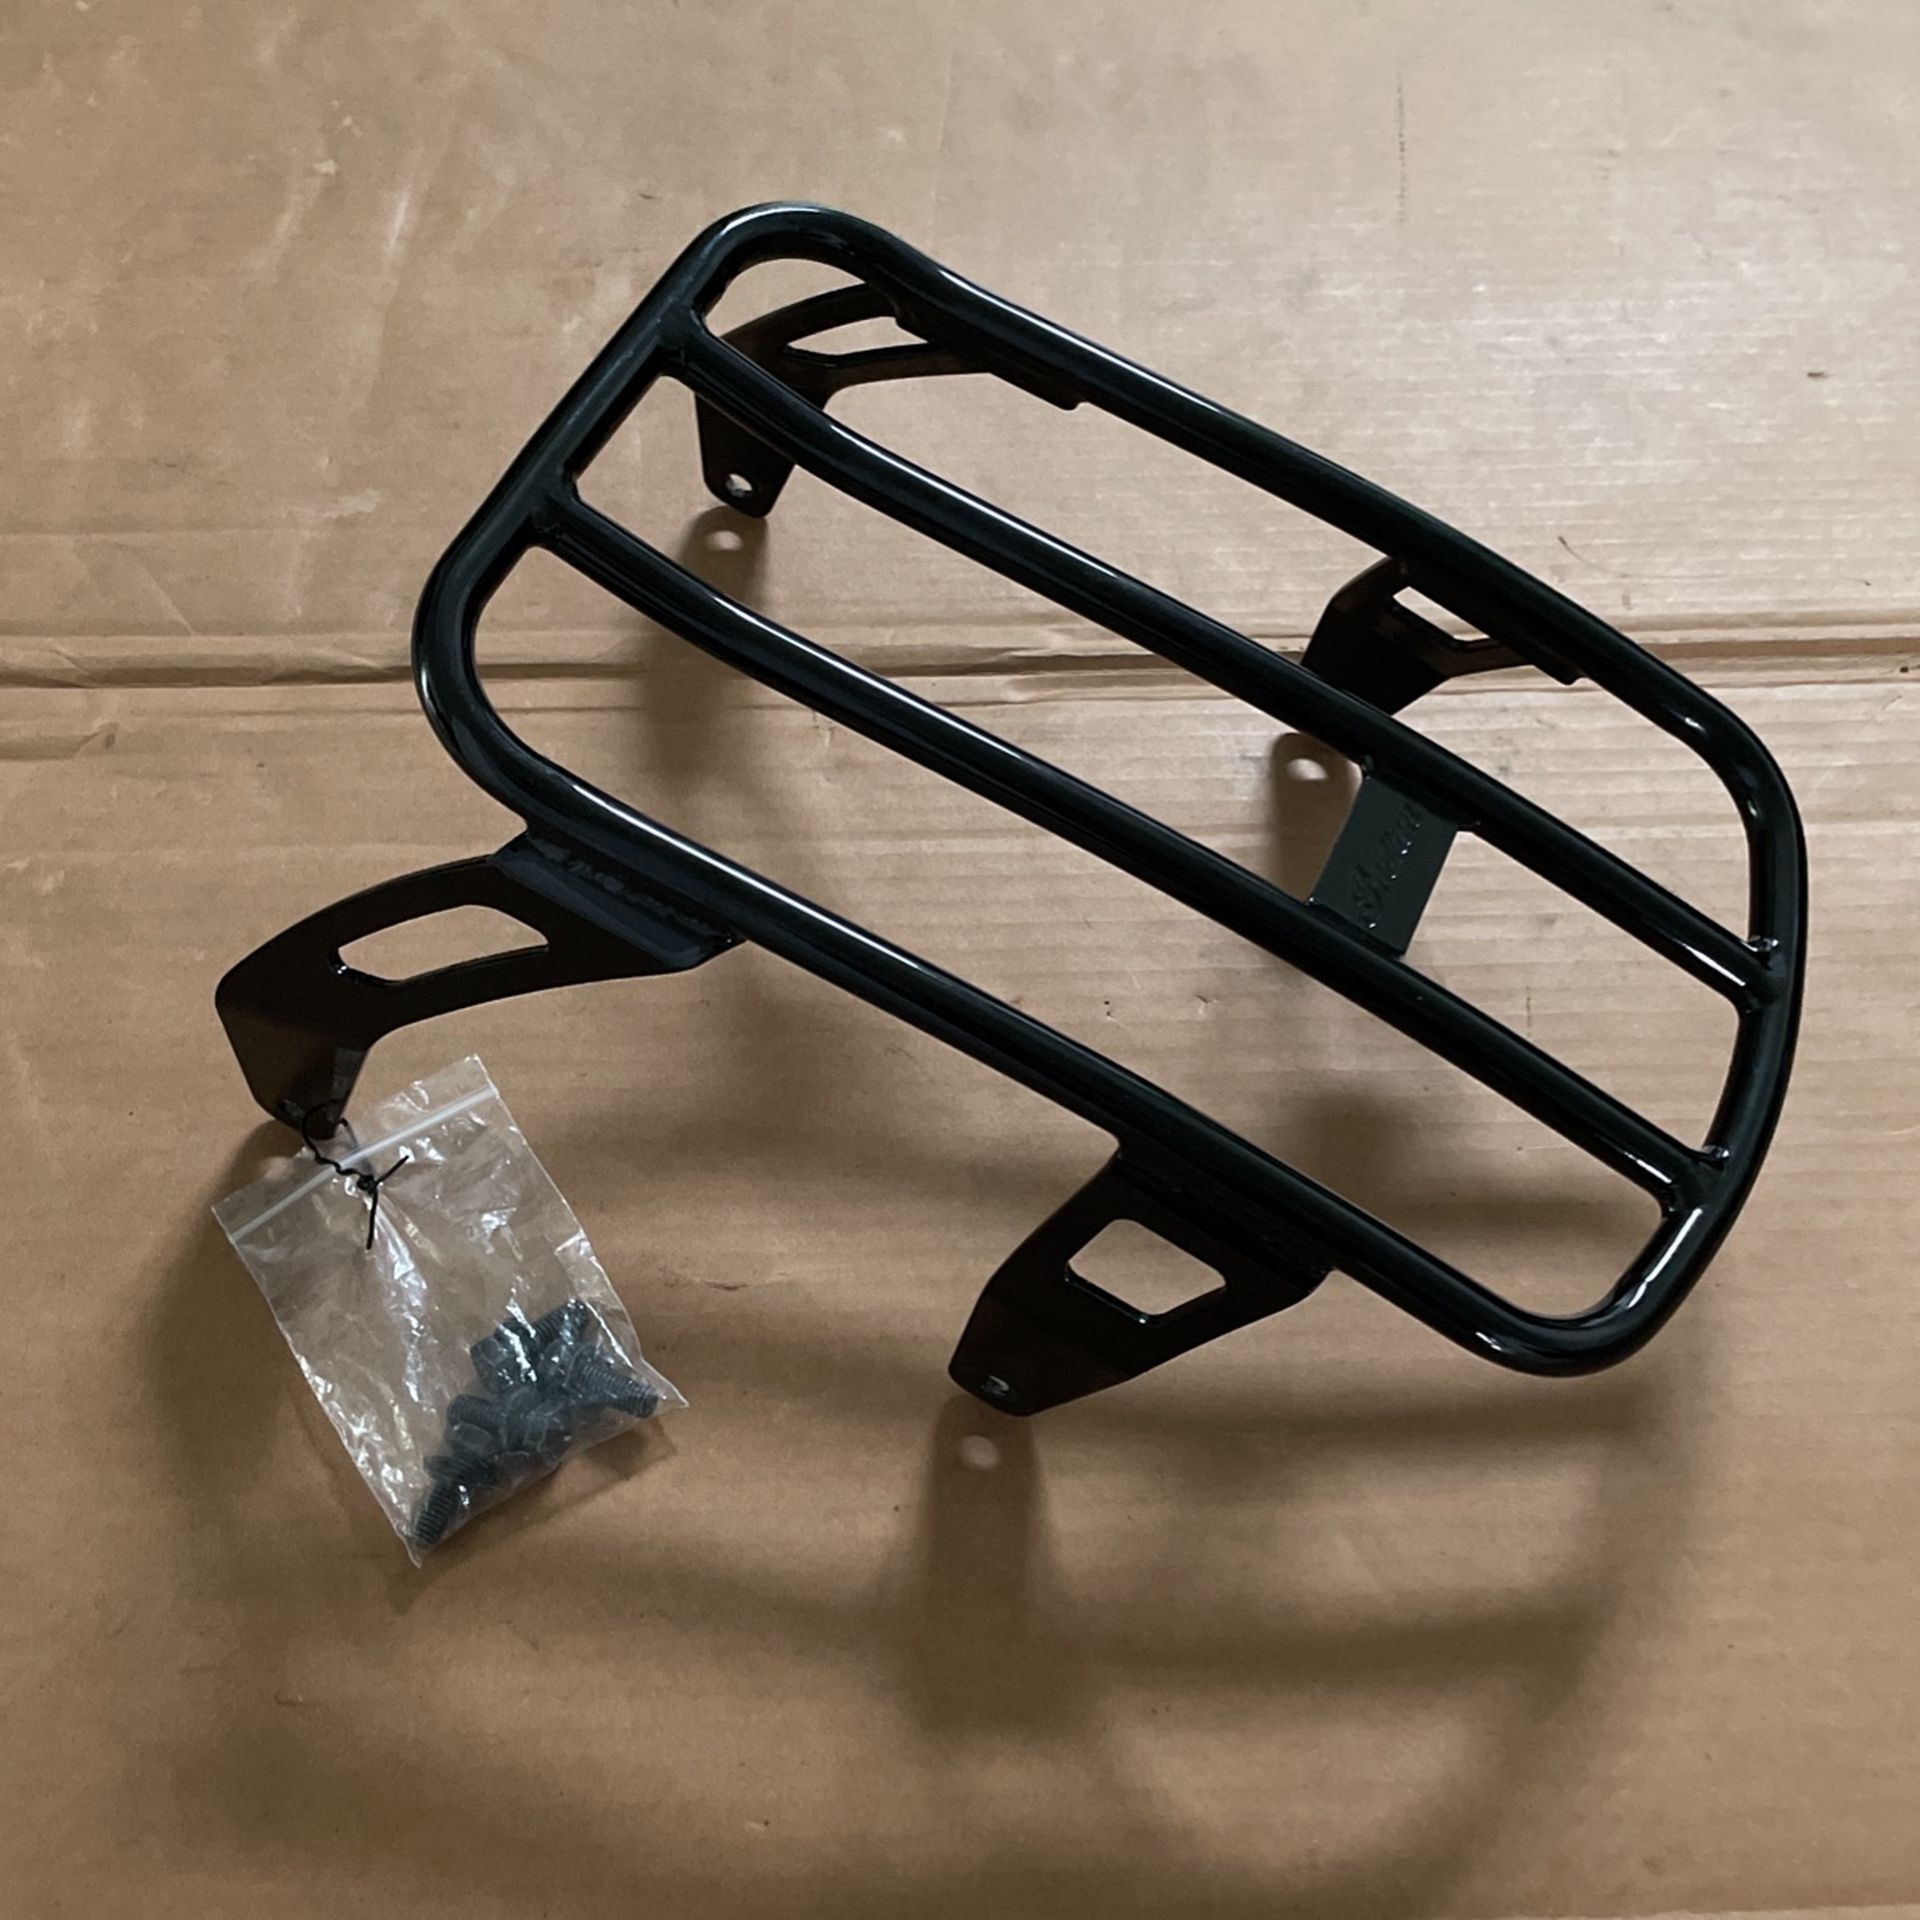 Indian Scout Bobber Motorcycle Luggage Rack